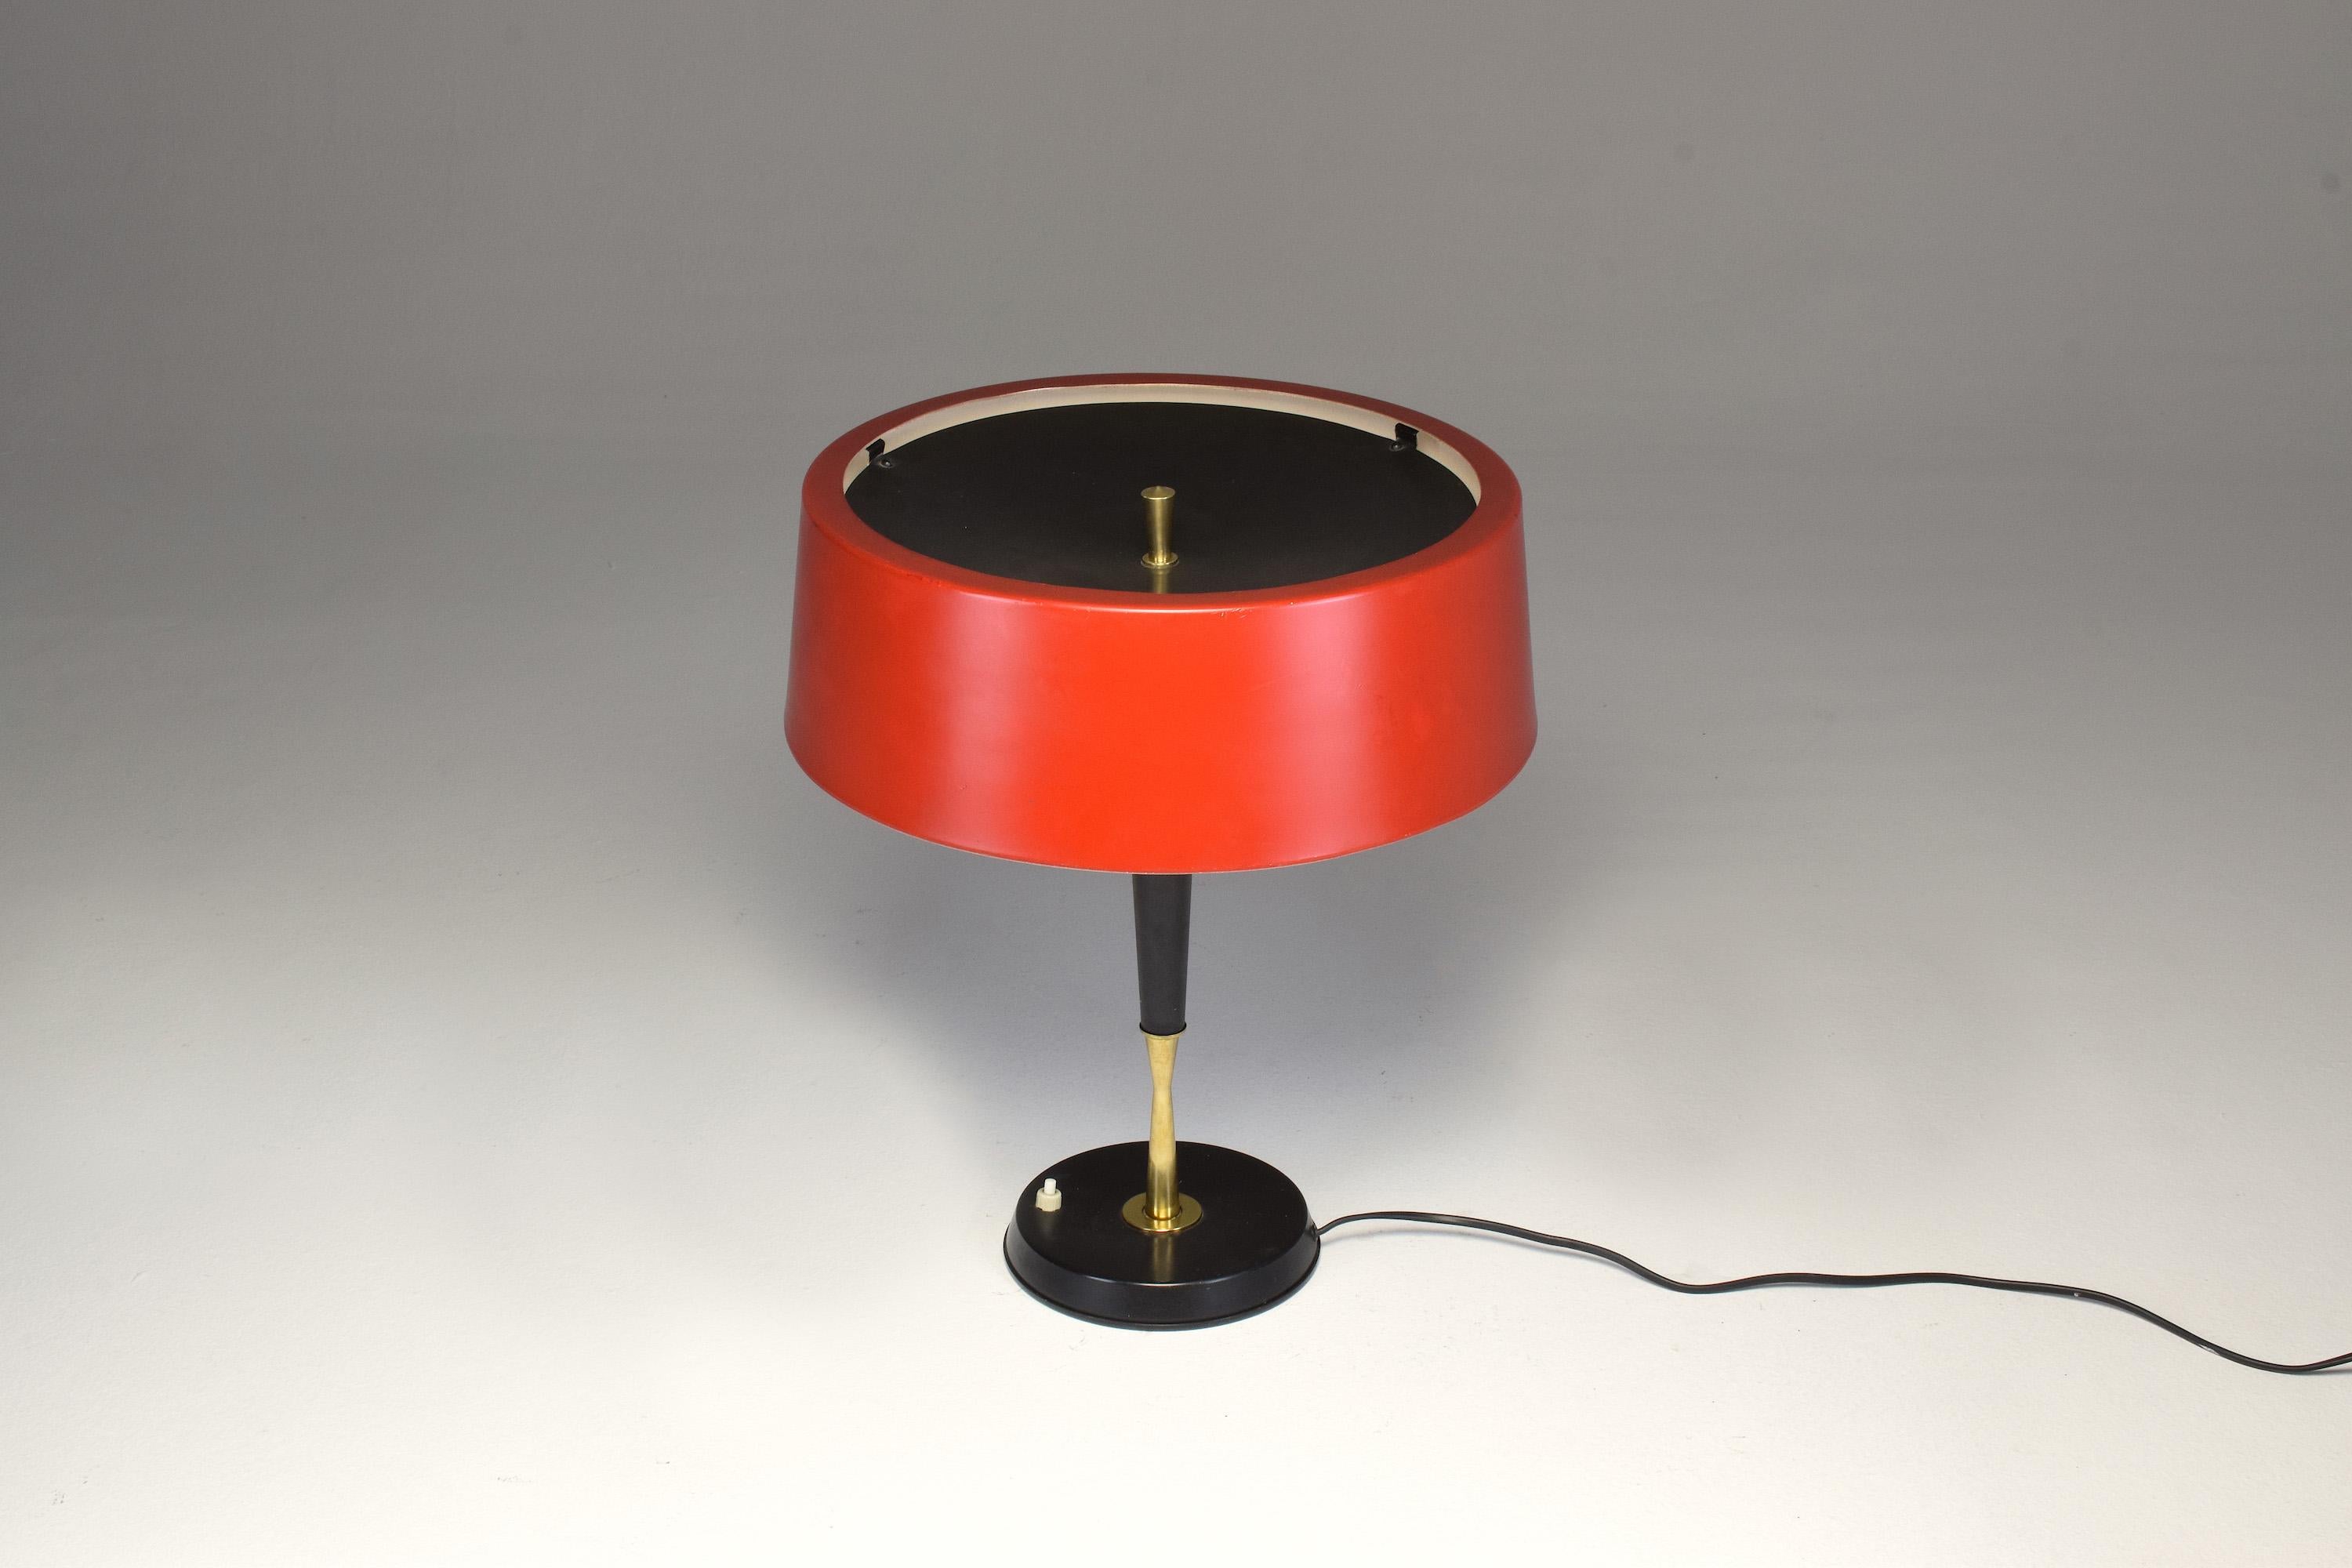 A Mid-Century Modern vintage table lamp or desk lamp by Italian designer Oscar Torlasco for the prestigious Italian lighting manufacturer Lumi. 
This tall rare statement piece is composed of a shade in elegant red and a structure of both lacquered